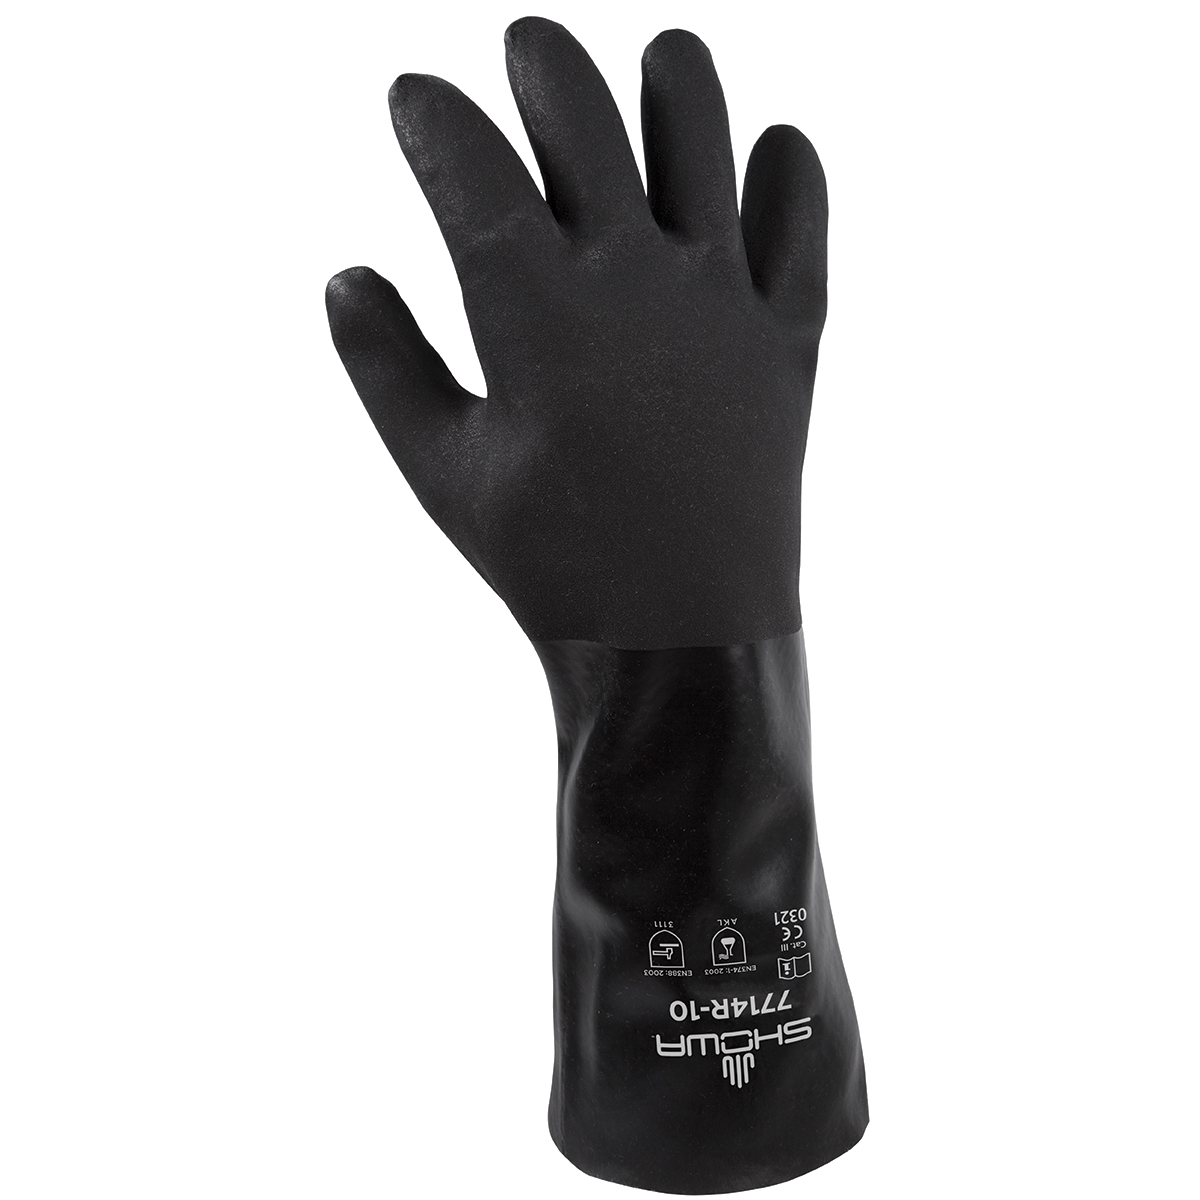 Chemical resistant PVC fully coated 14" gauntlet w/jersey liner,Santizied, black, rough finish, large